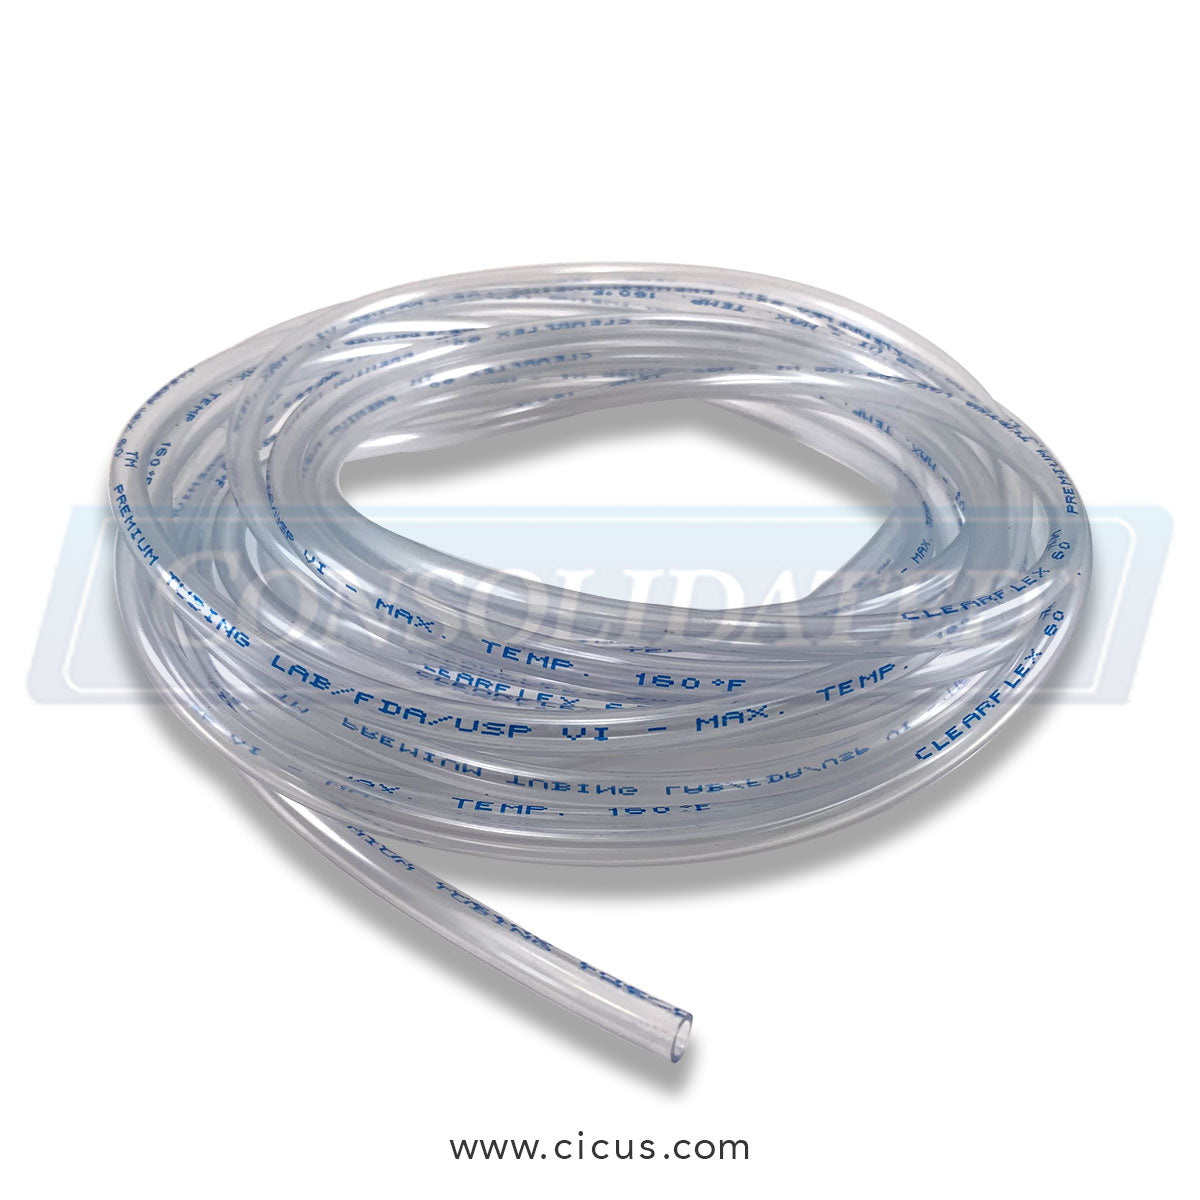 B & C Technologies PVC Tubing - 4MM ID / Sold By The Foot (200-003)